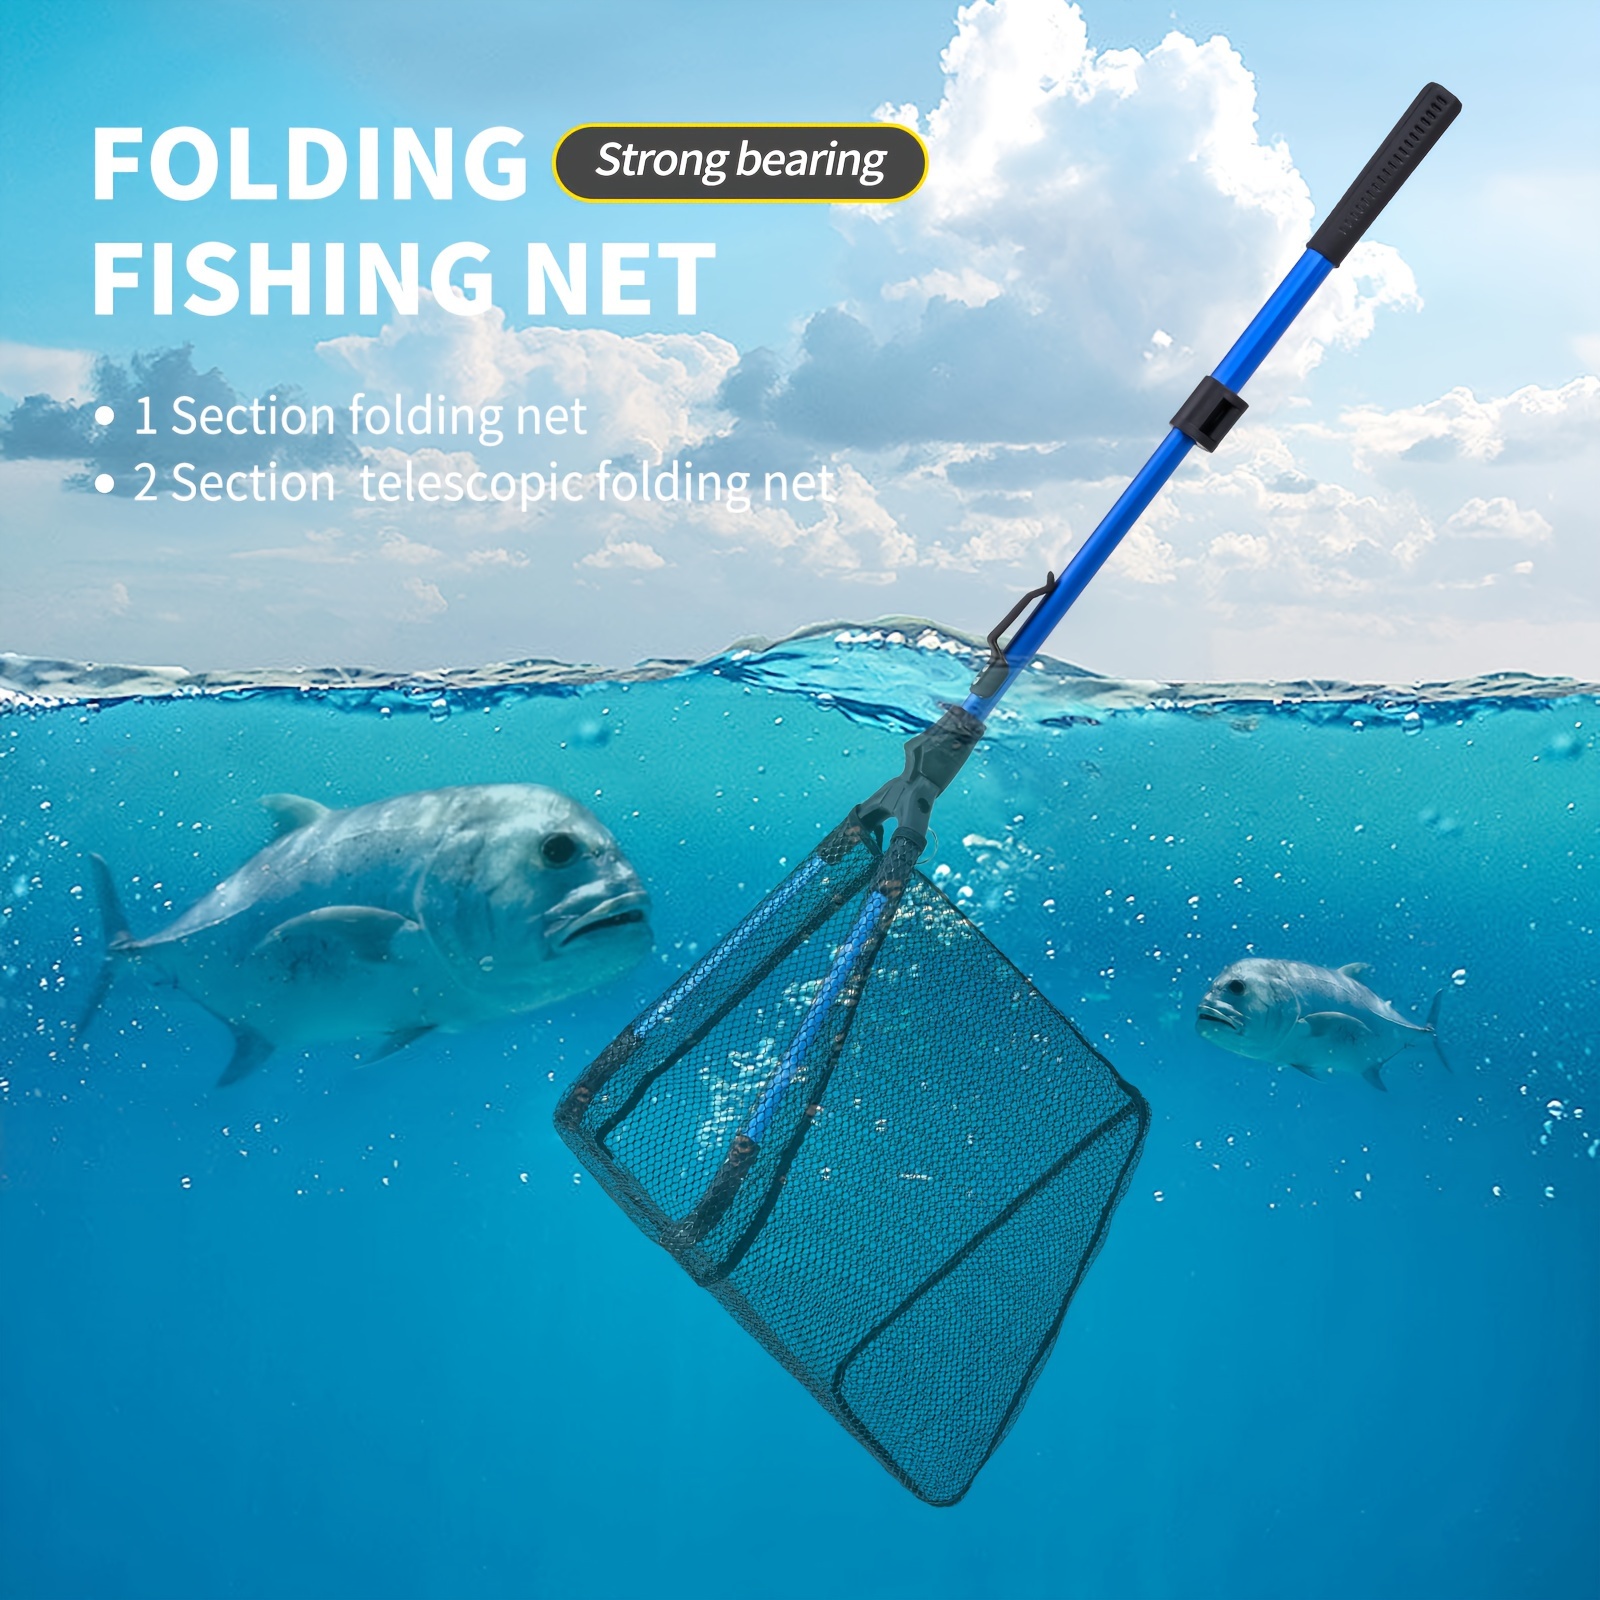 Telescoping Aluminum Fishing Landing Net - Ideal for Freshwater and  Saltwater Fishing, Lightweight and Durable